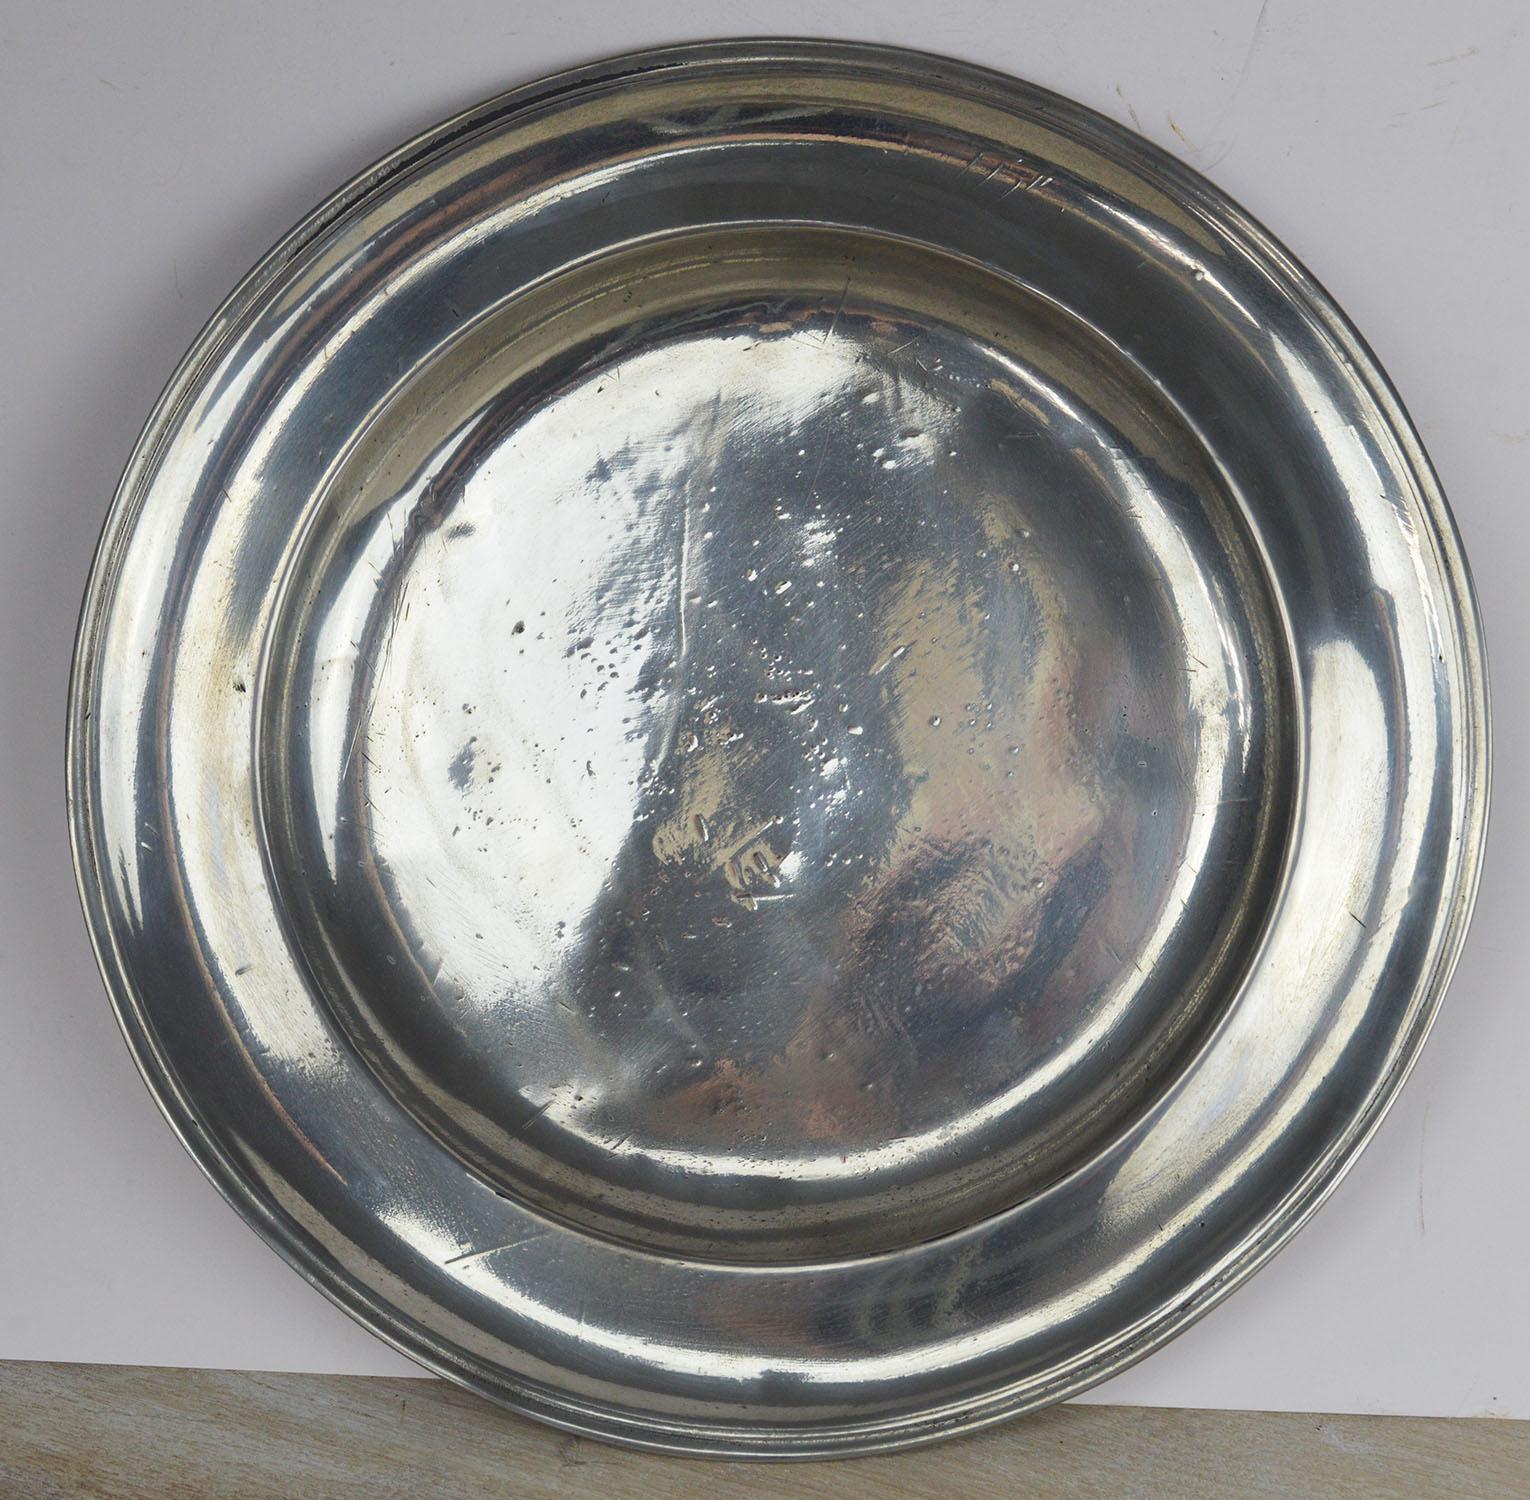 English 3 Large Antique Brightly Polished Pewter Chargers, 18th Century